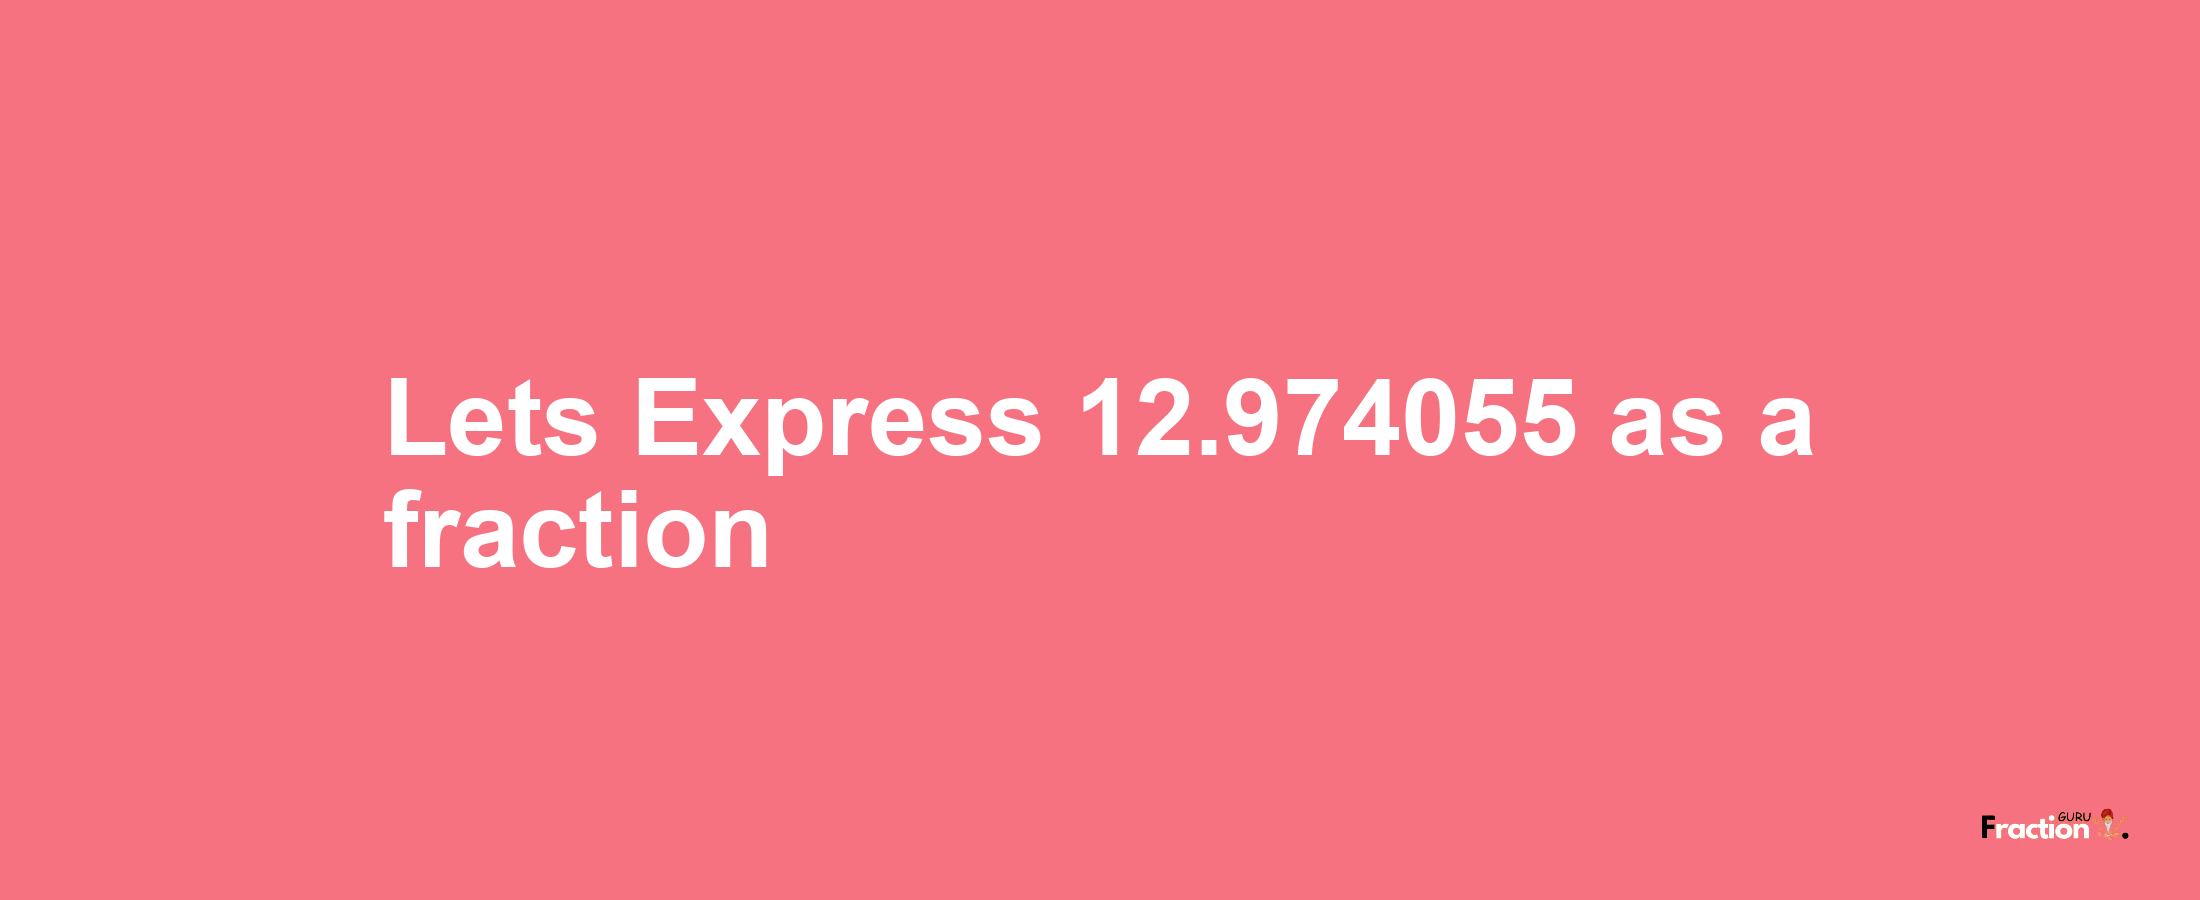 Lets Express 12.974055 as afraction